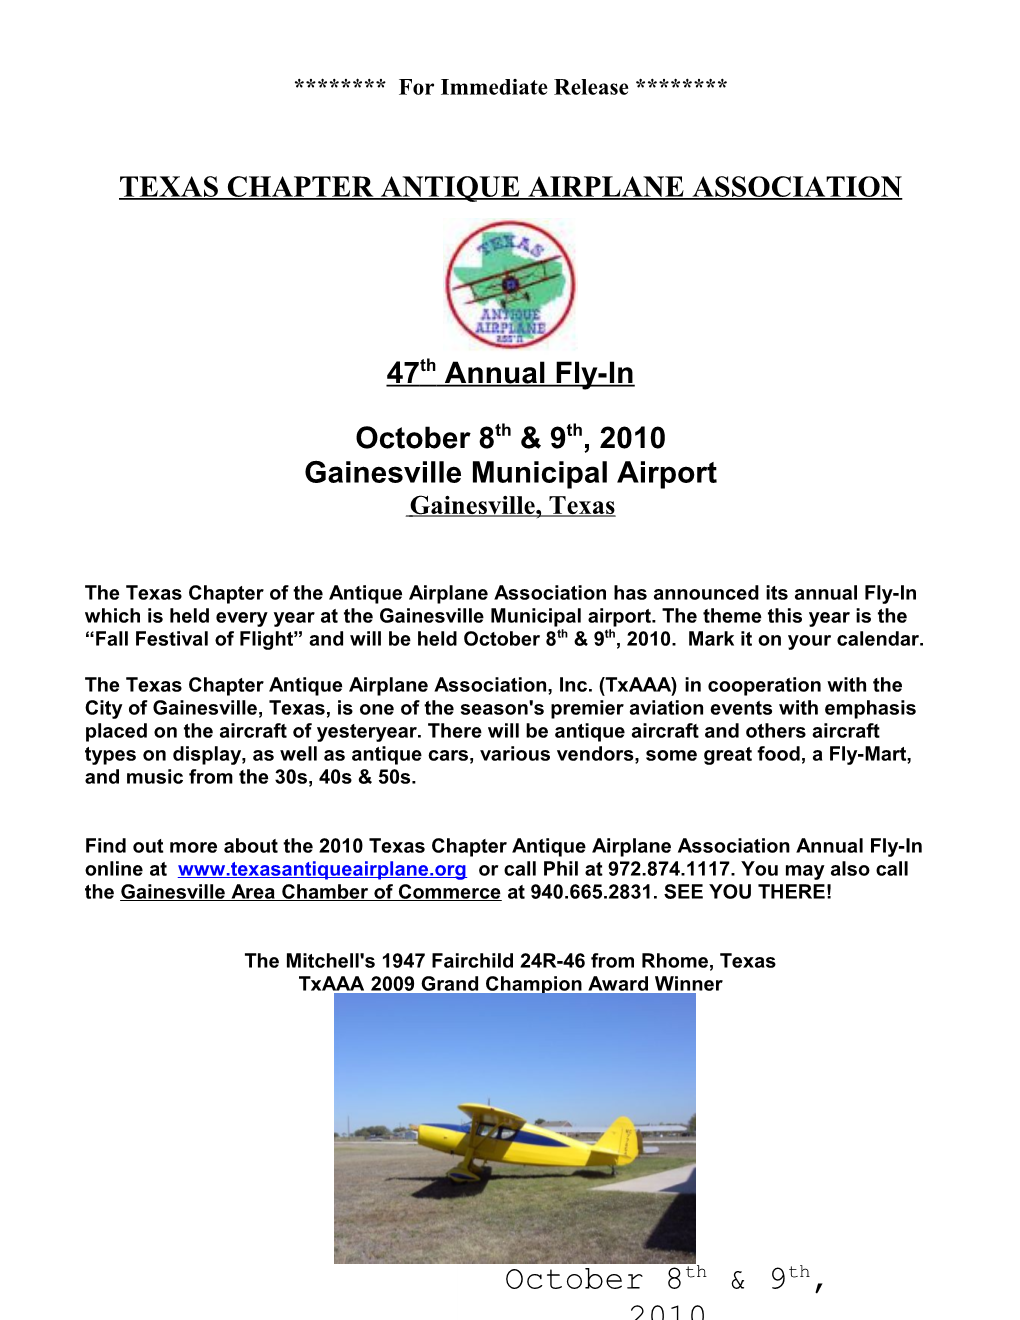 Texas Chapter Antique Airplane Association